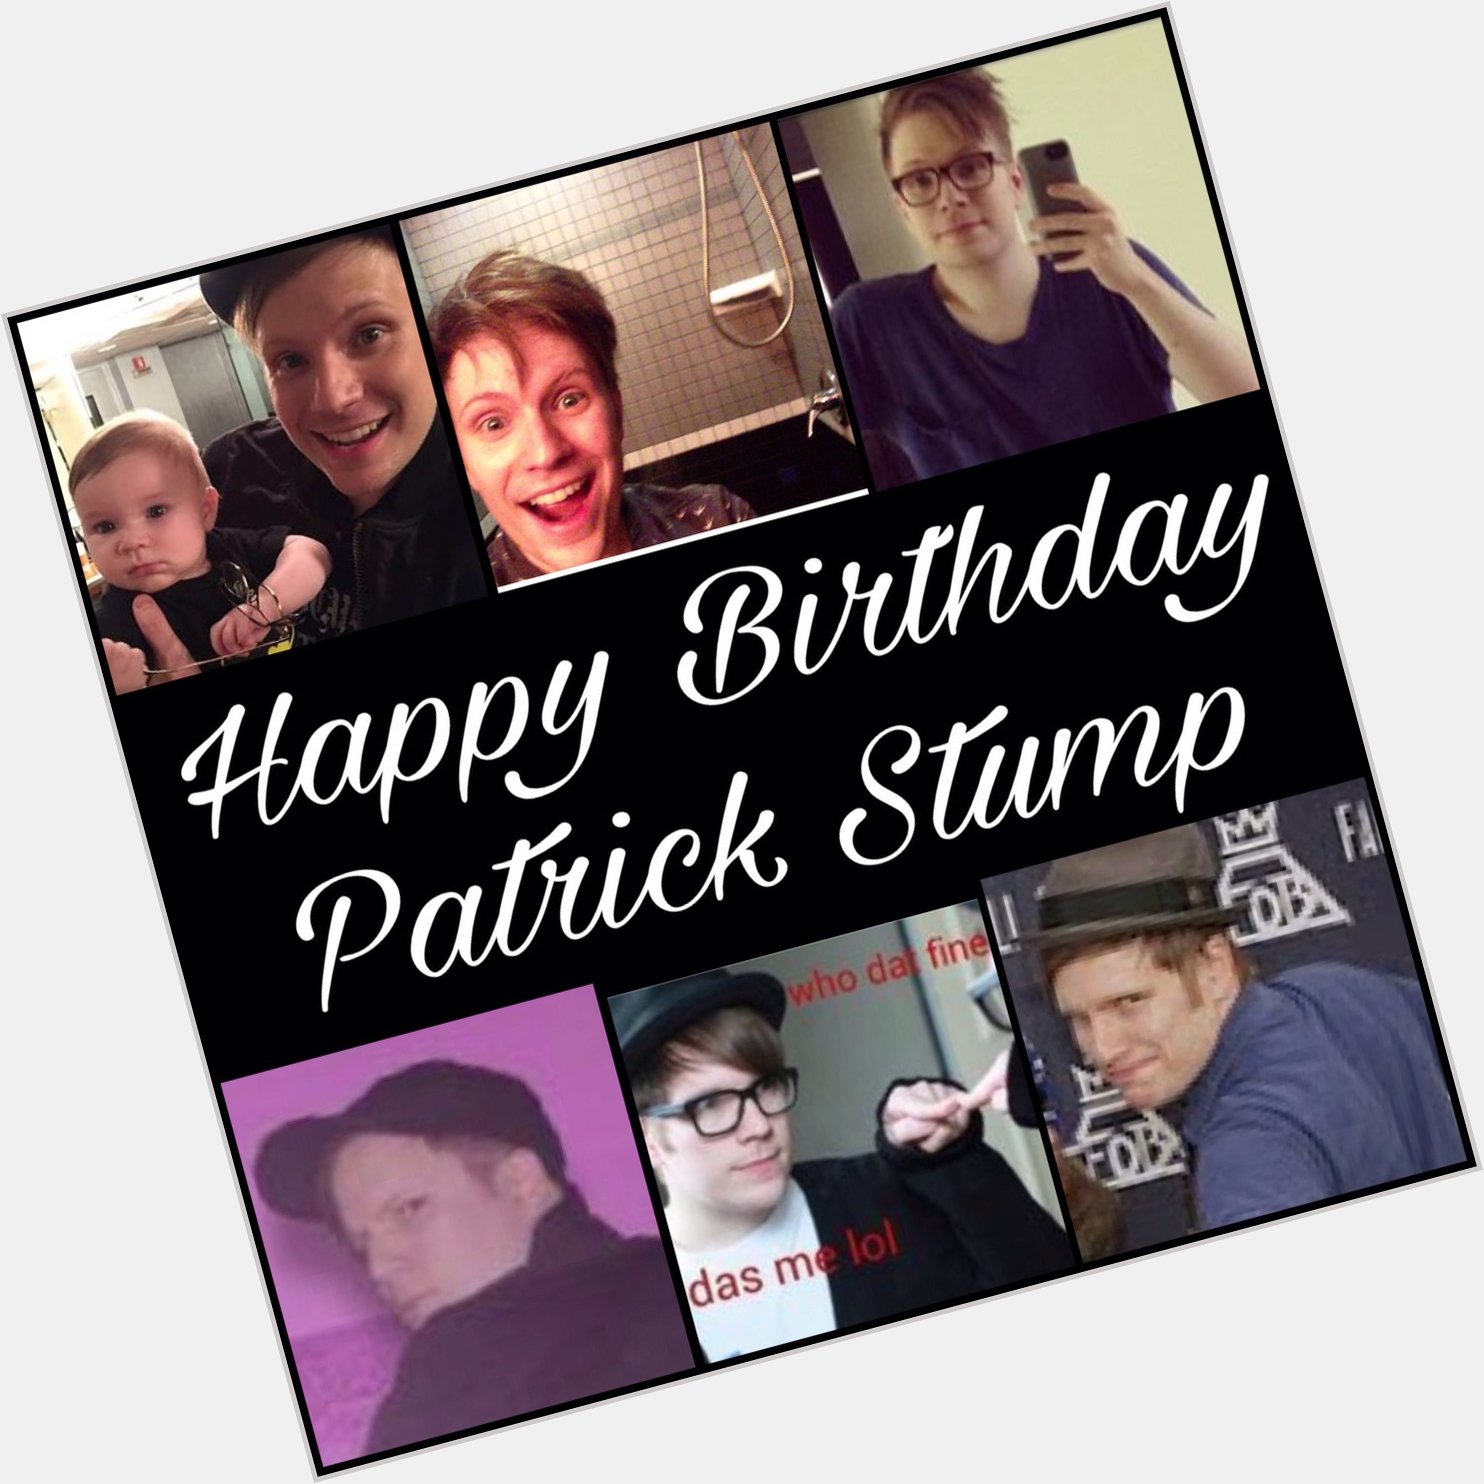 Happy Birthday to the most fedorable person Patrick Stump 
We love u!!     